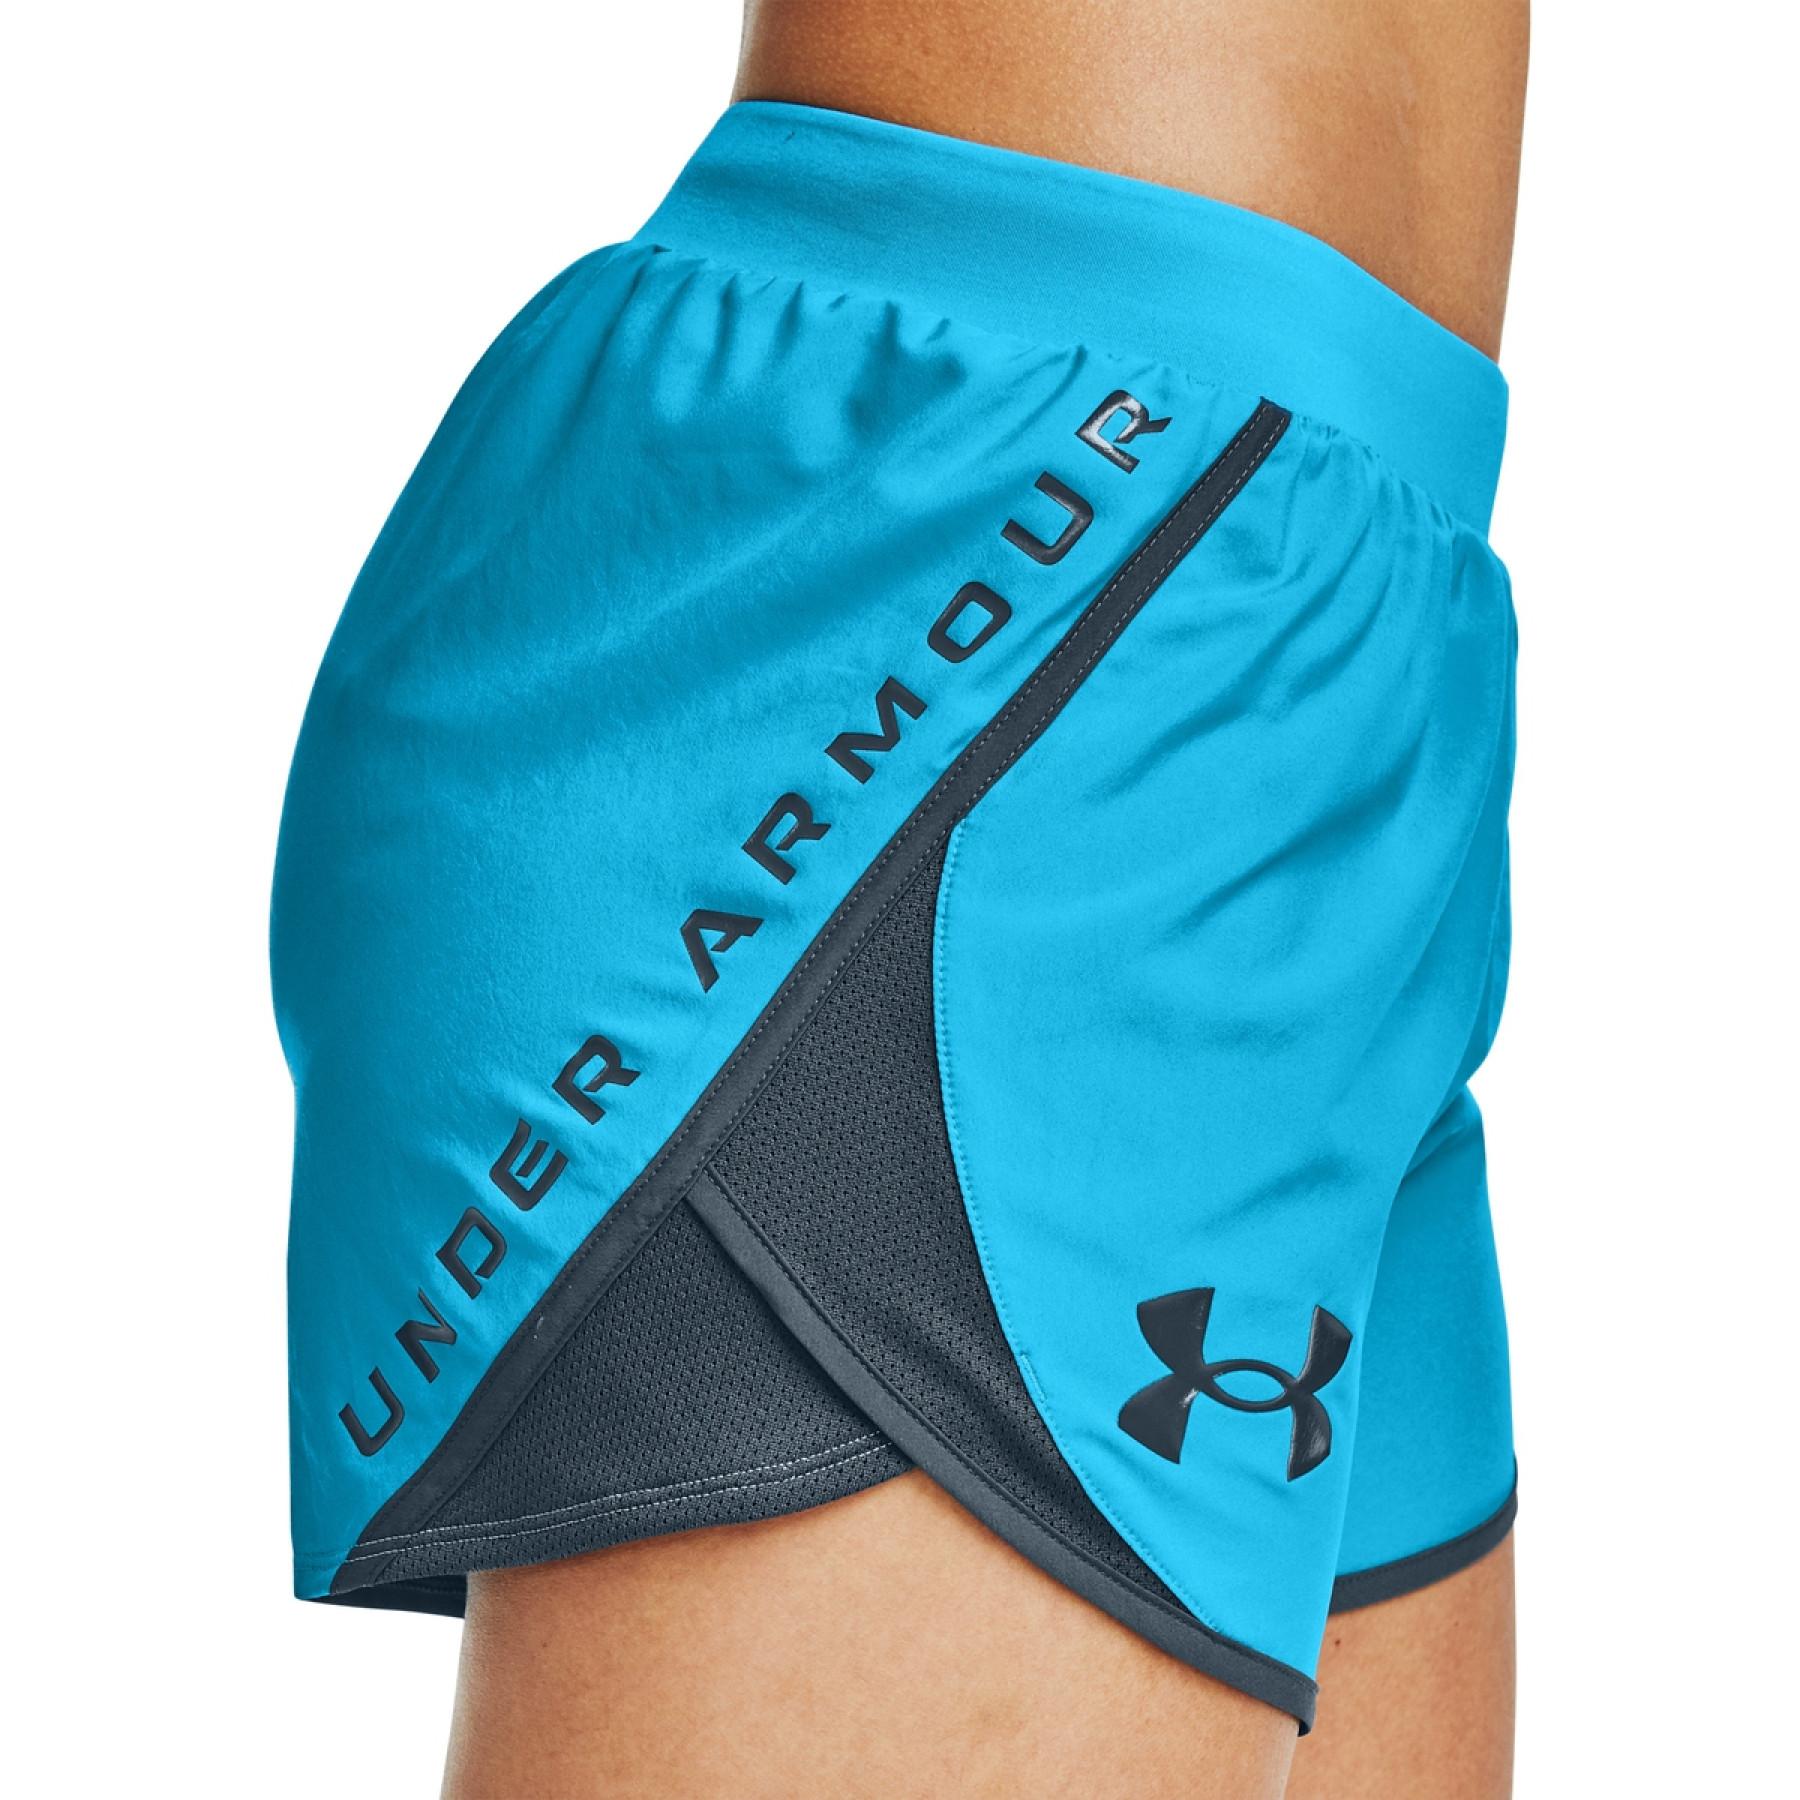 Pantalones cortos de mujer Under Armour Fly By 2.0 Stunner